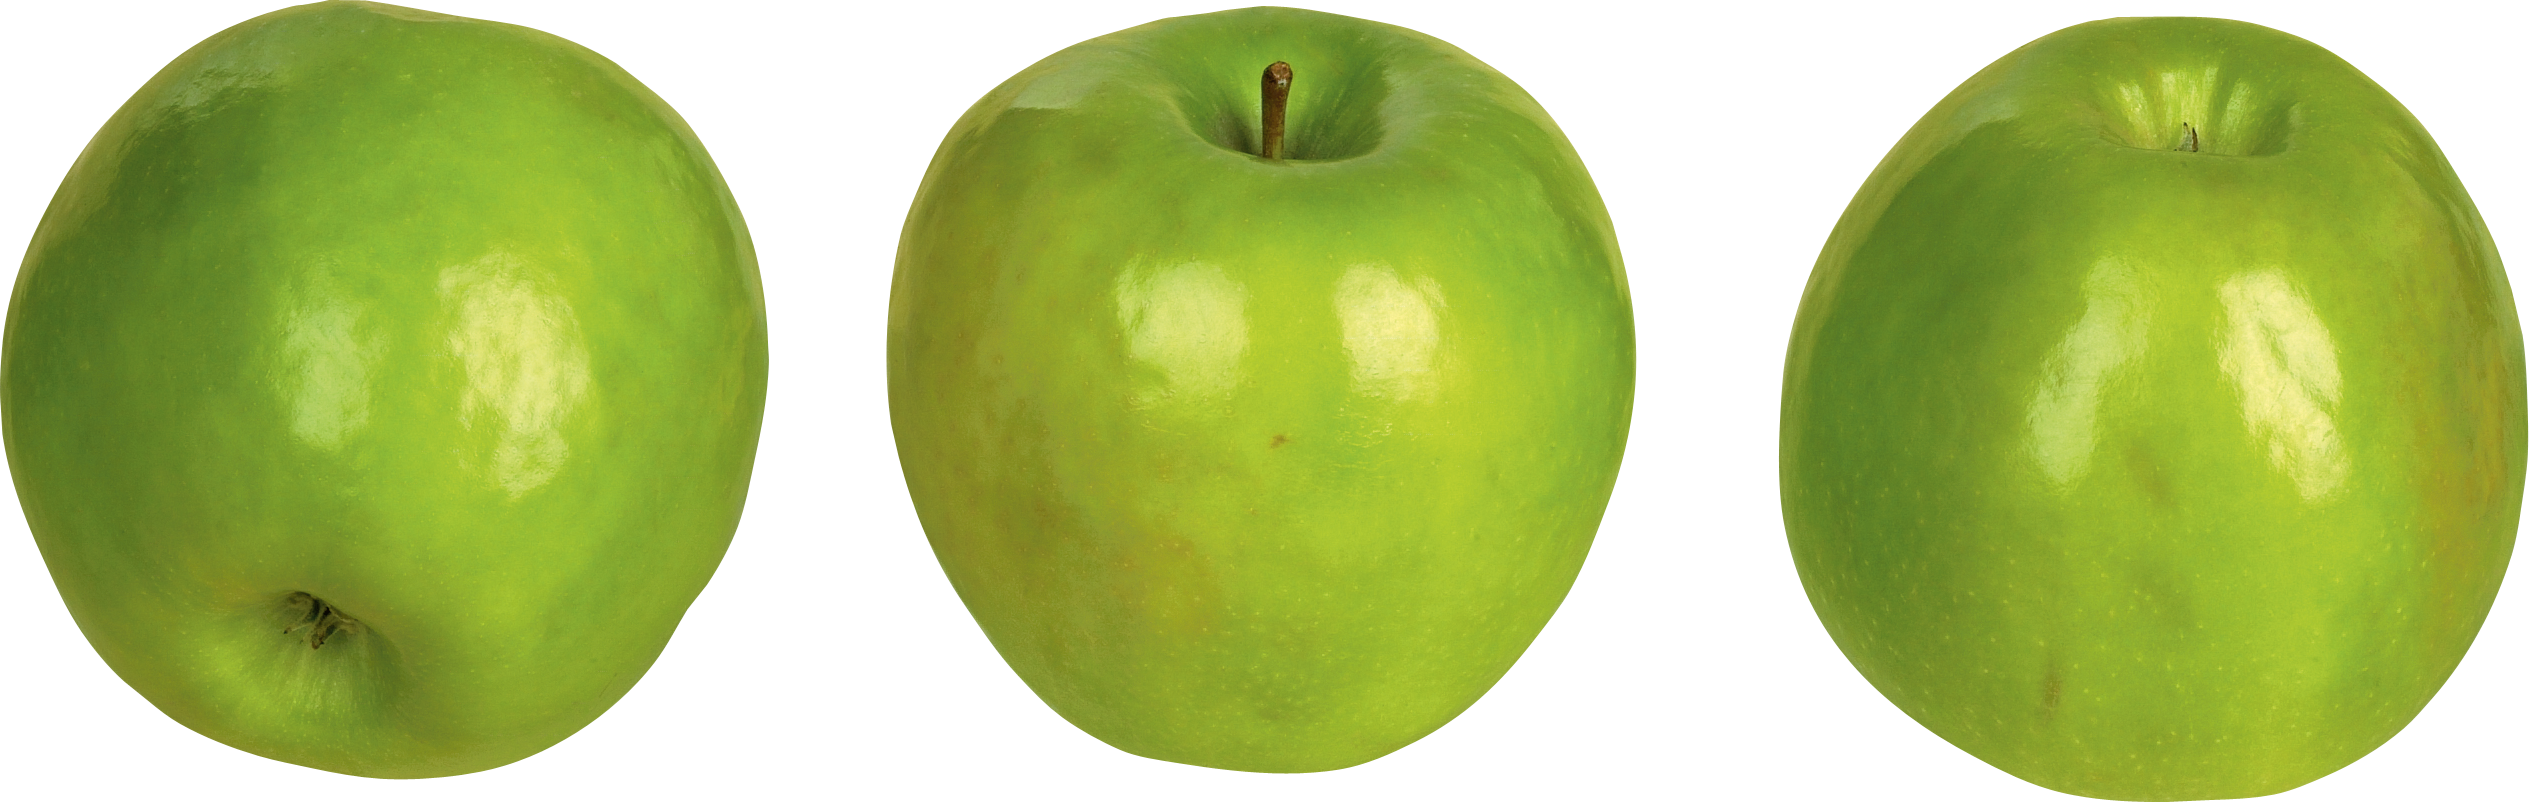 Three green apples PNG